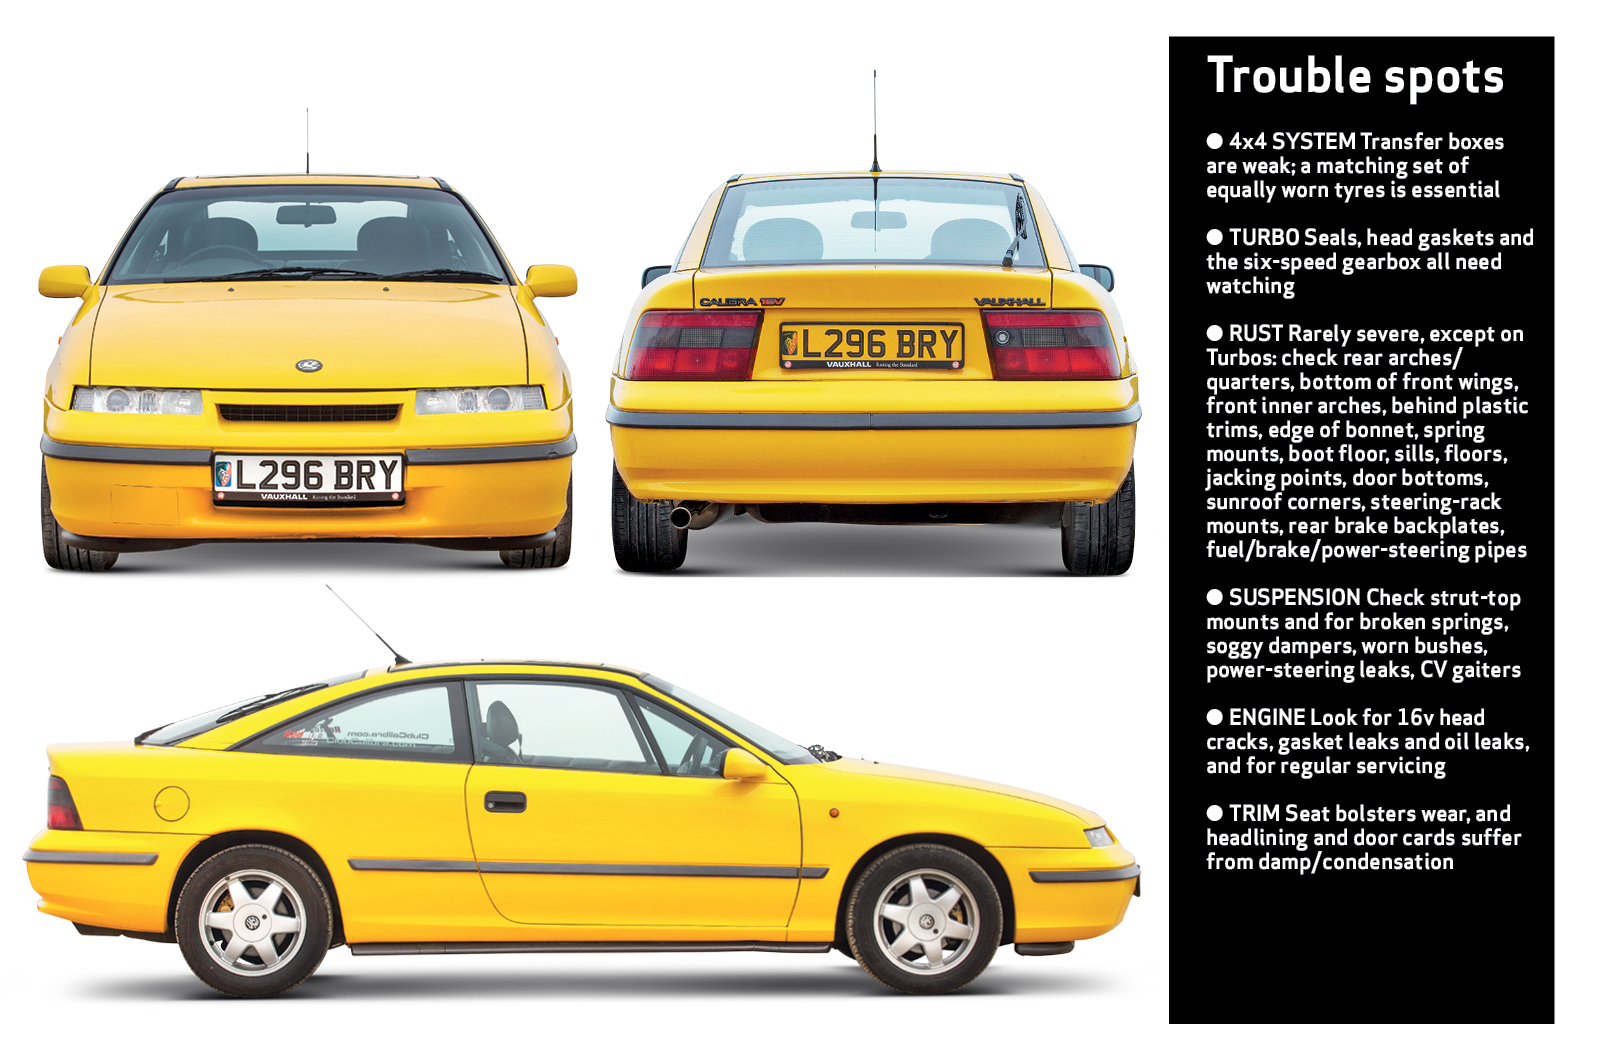 Classic & Sports Car – Buyer’s guide: Vauxhall Calibra